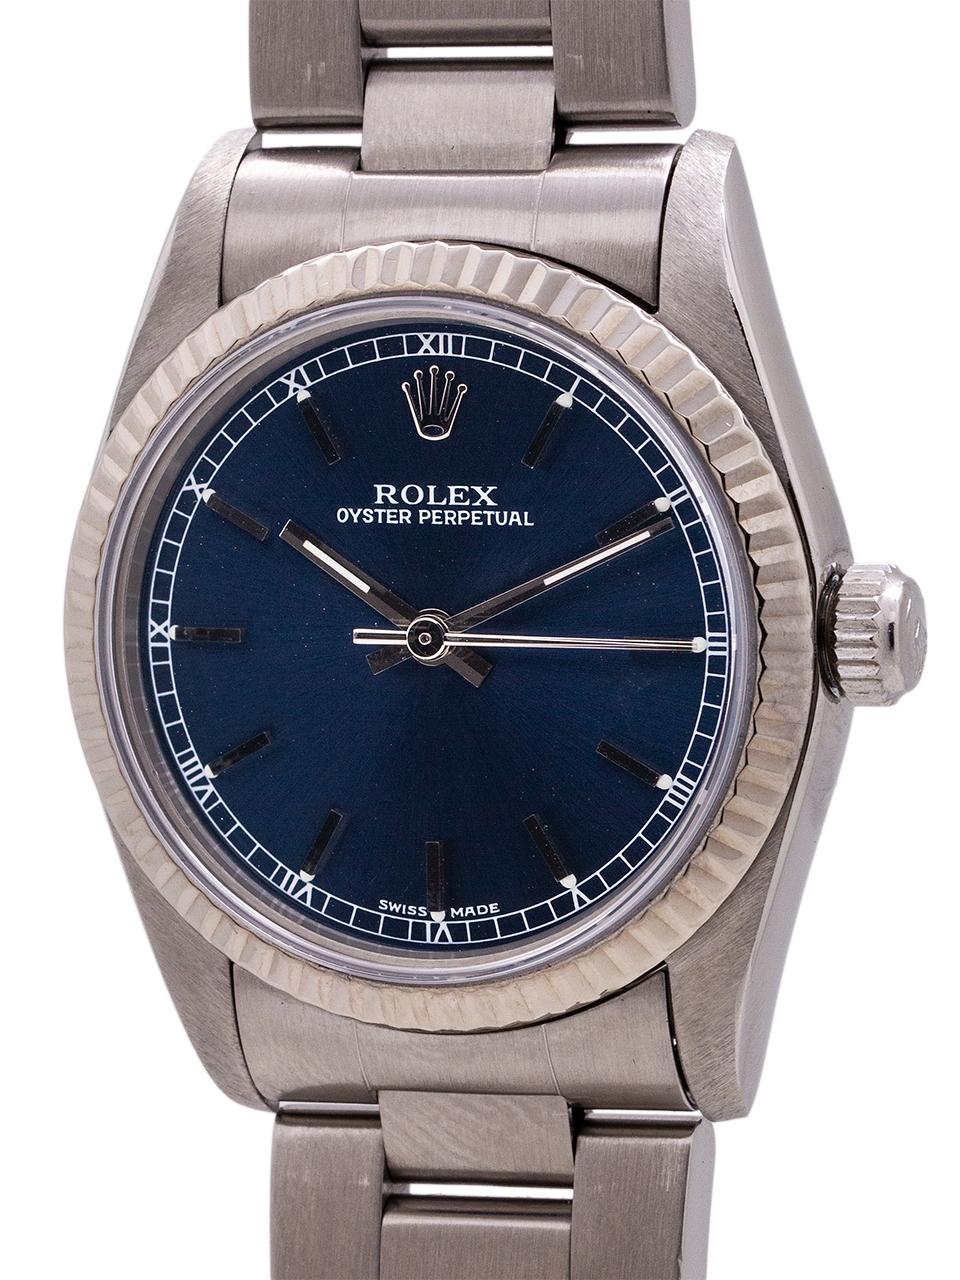 Rolex Midsize Oyster Perpetual Ref 67514, circa 1995 In Excellent Condition For Sale In West Hollywood, CA